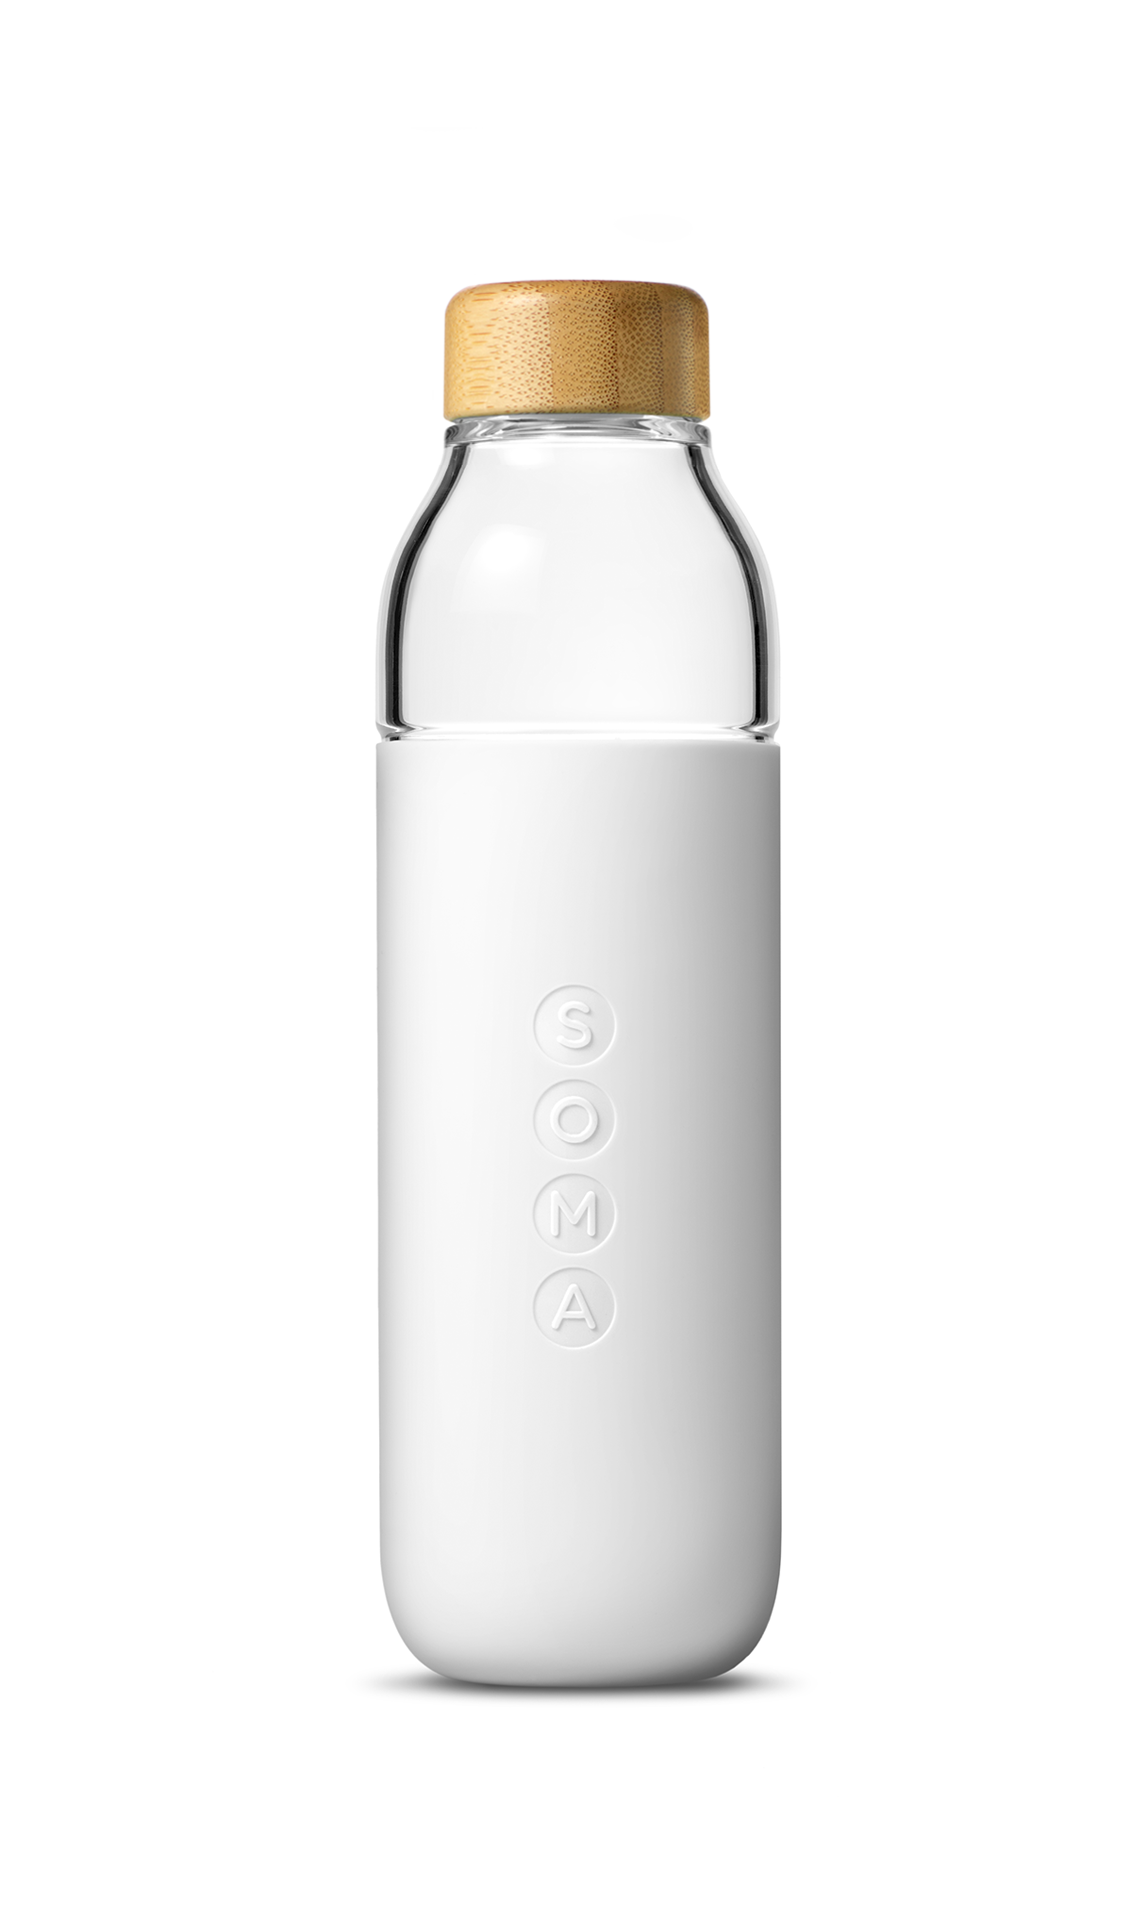 Soma: makers of beautiful, sustainable products to hydrate the world